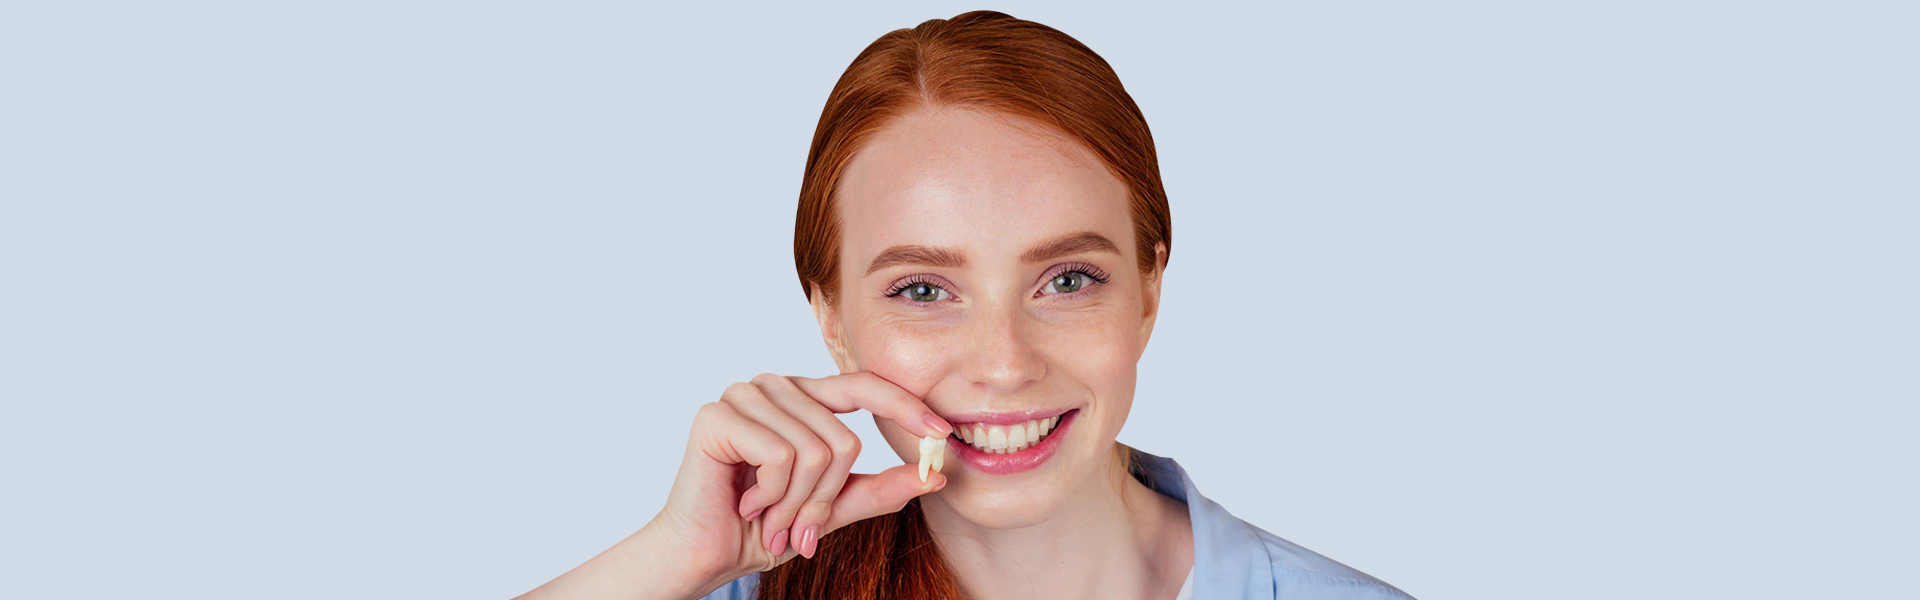 Myths And Facts About A Tooth Extraction Procedure